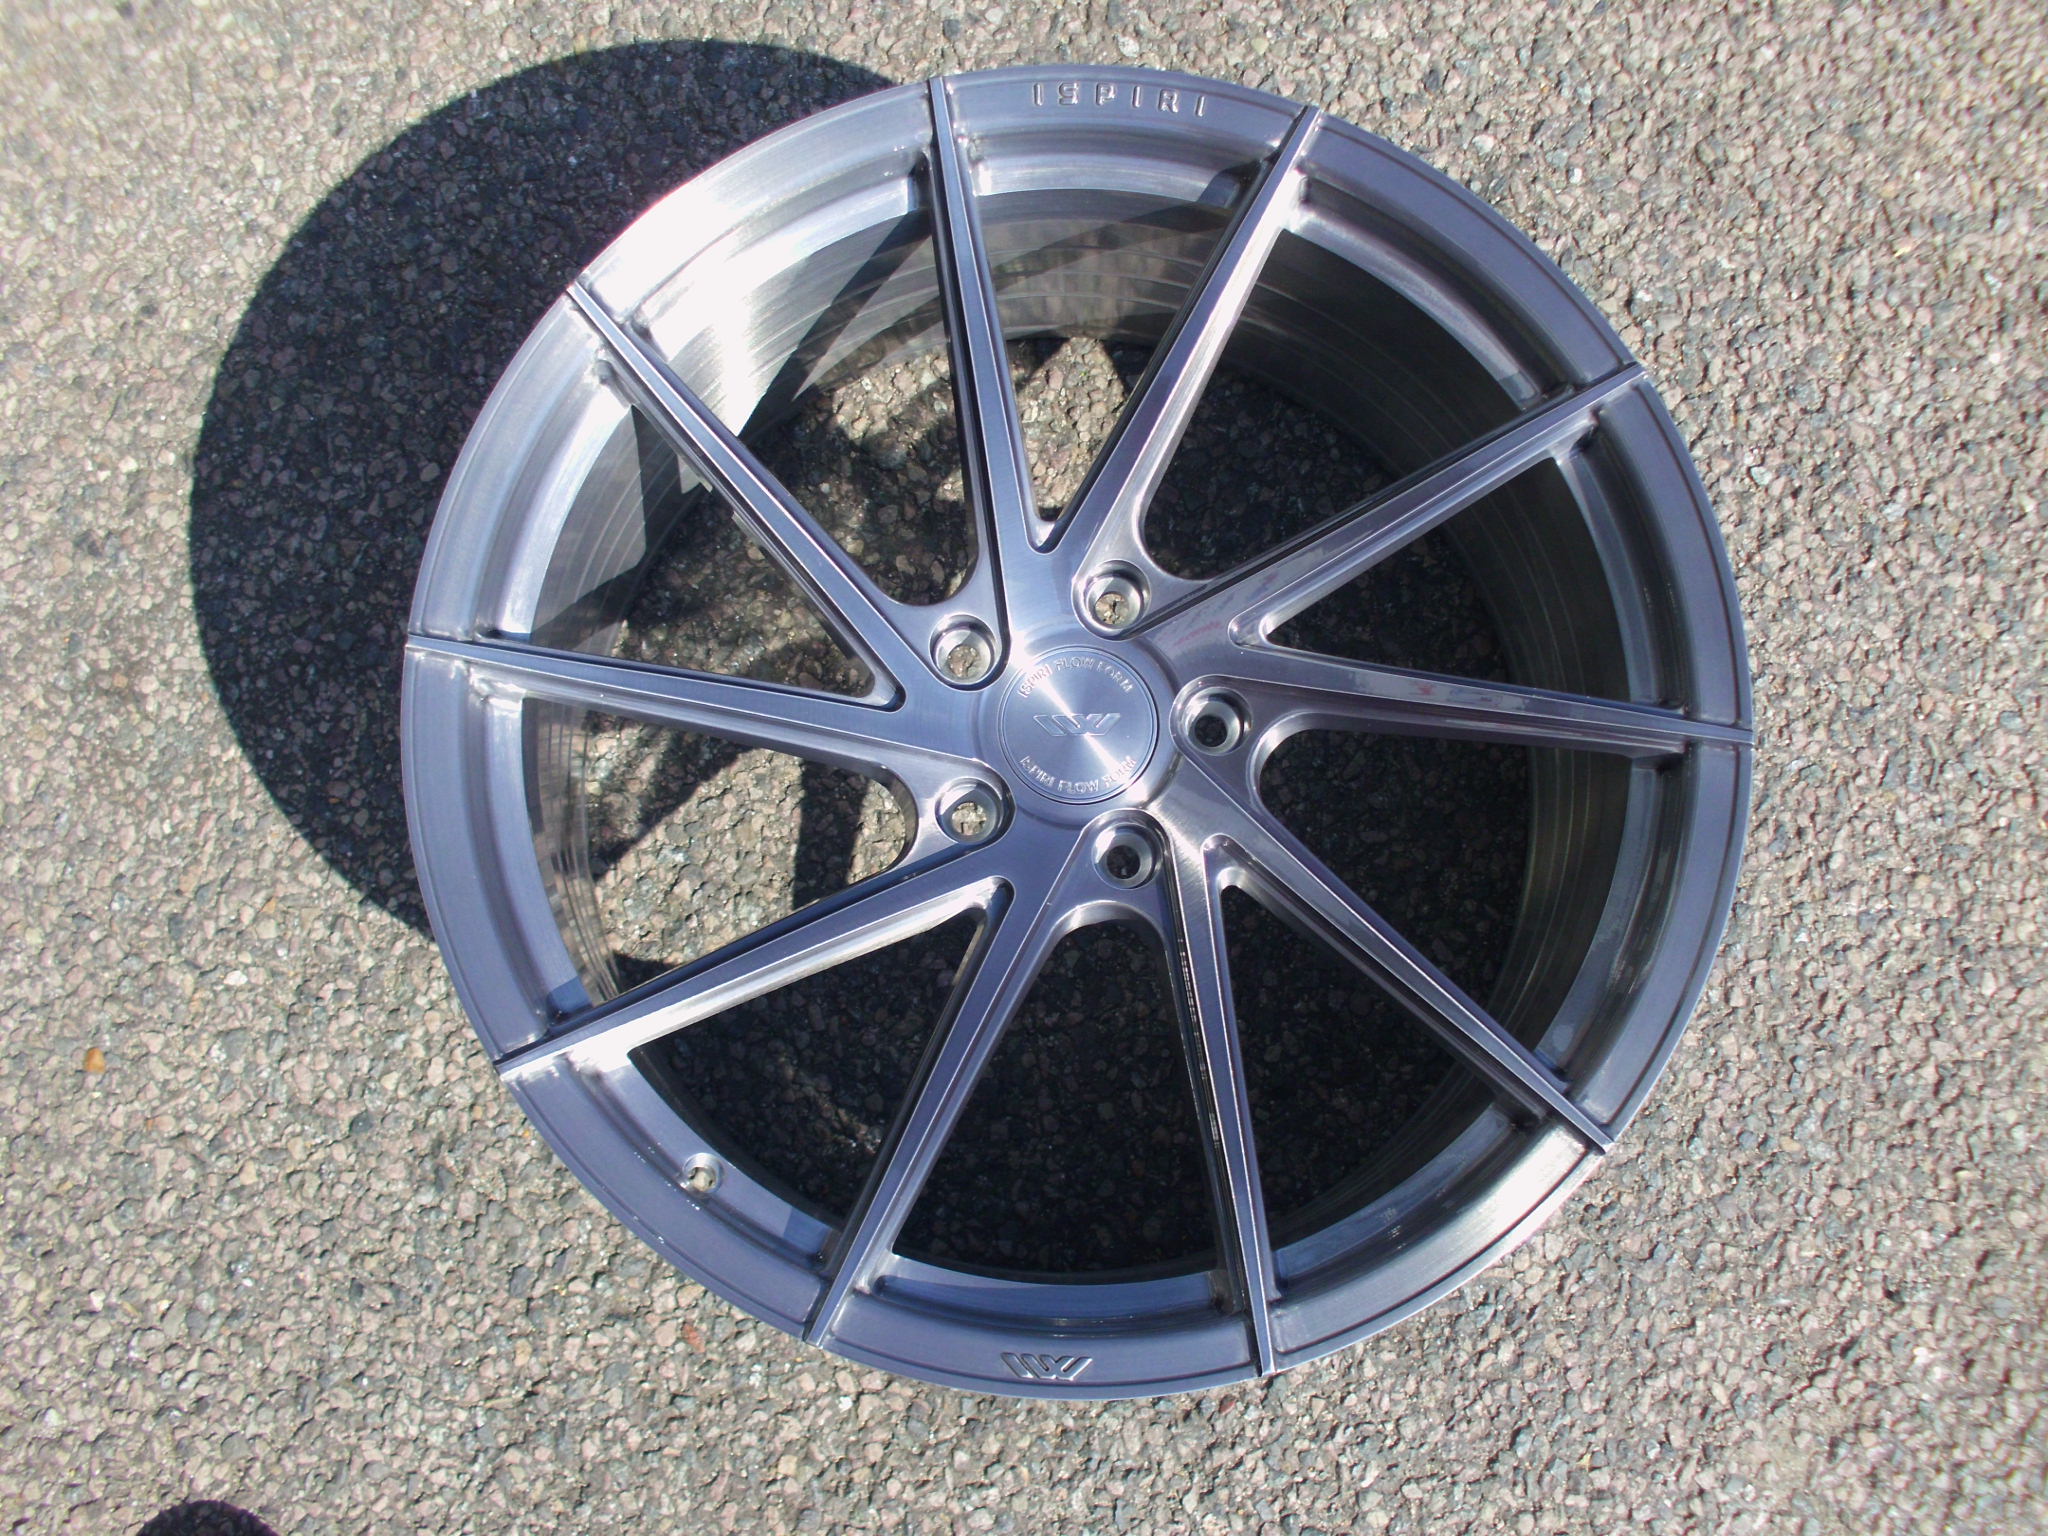 NEW 20  ISPIRI FFR1D MULTI SPOKE DIRECTIONAL ALLOY WHEELS IN FULL BRUSHED CARBON TITANIUM  DEEPER 10  OR 10 5  ALL ROUND